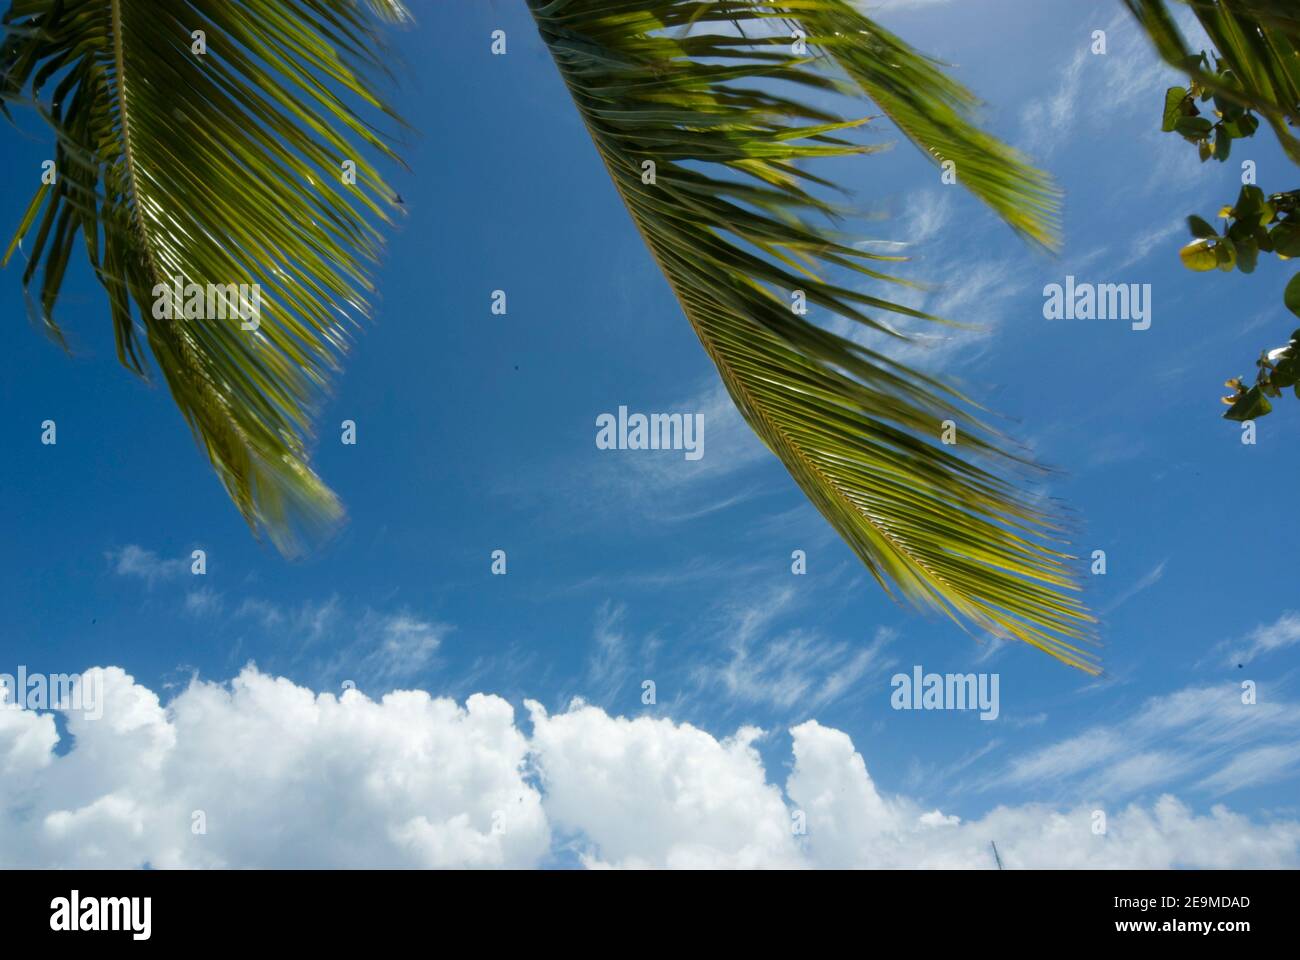 Palm tree leaves against a blue sky Stock Photo